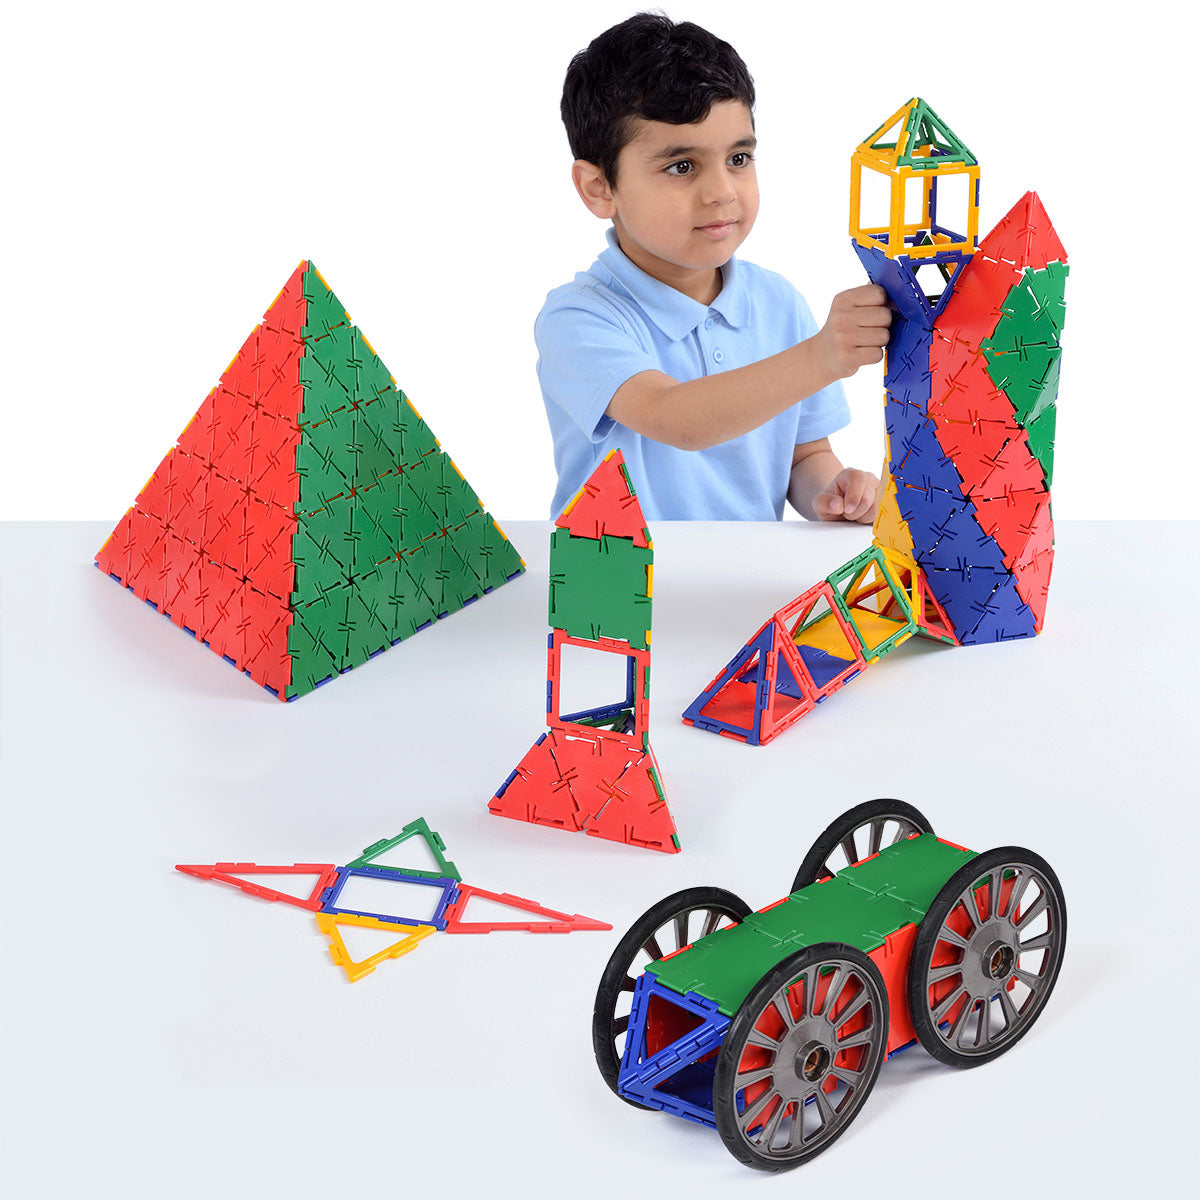 Polydron Mighty Box, The Polydron Mighty Box is a highly versatile construction system used in schools worldwide. With this set, children can explore and build a wide variety of 2D and 3D models, allowing their creativity and problem-solving skills to flourish.One of the standout features of the Polydron Mighty Box is the inclusion of wheels, which enable the construction of moving vehicles. This feature adds an exciting element to the building process, allowing children to create functional models that can